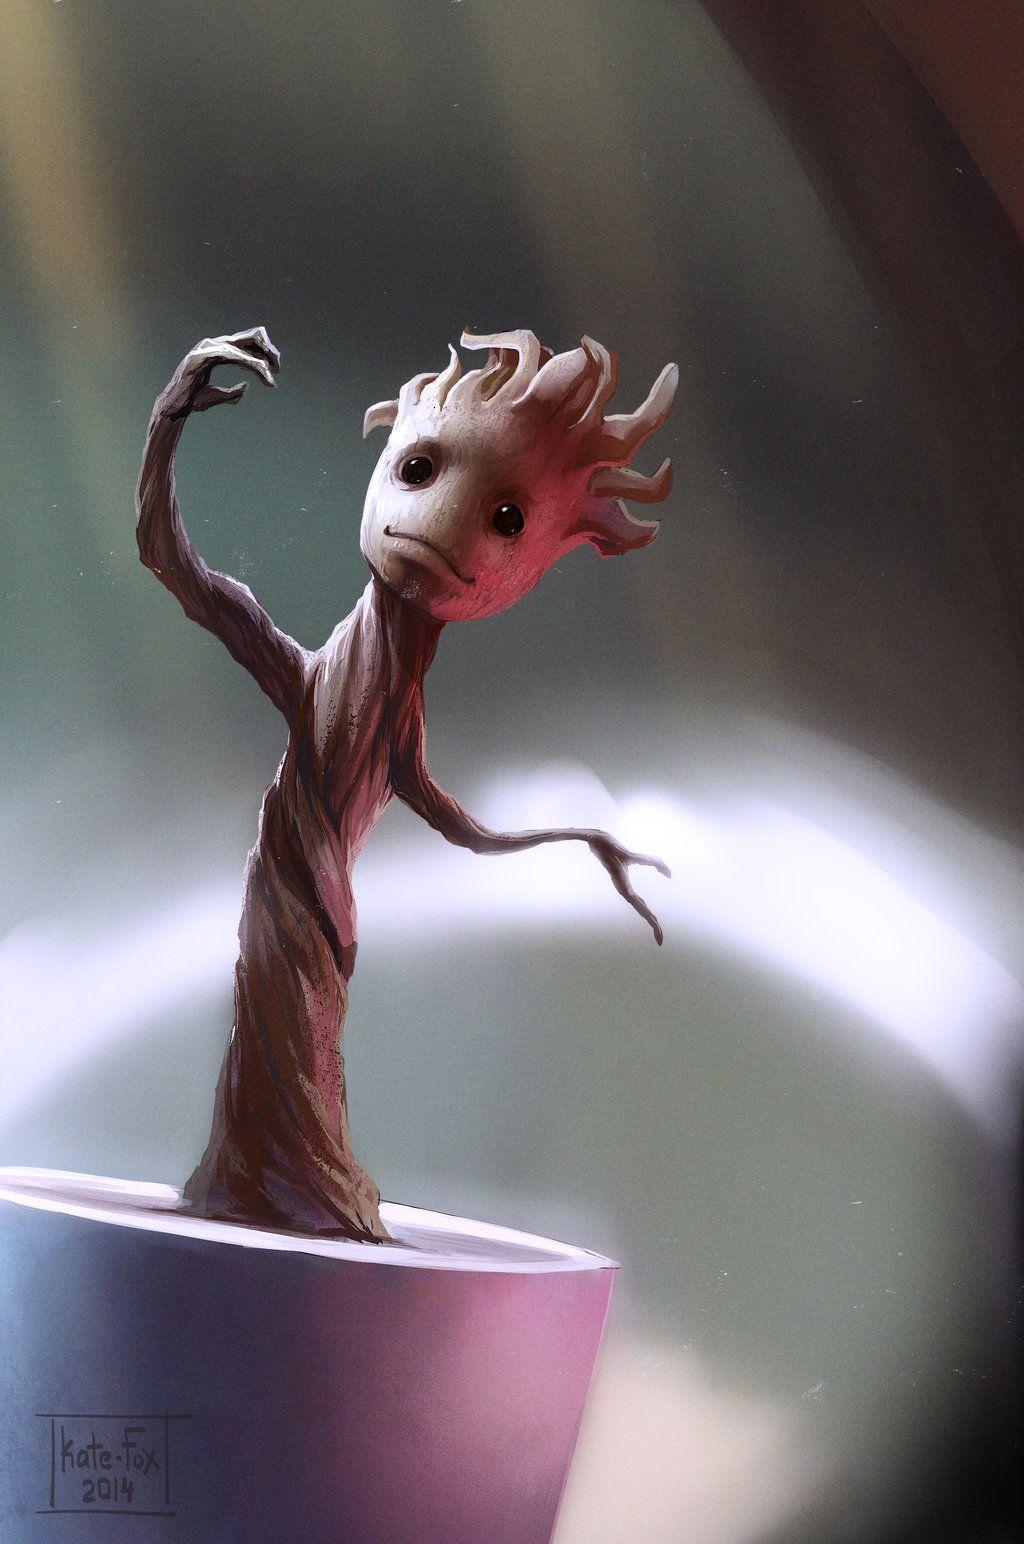 We are GROOT. I Am Groot